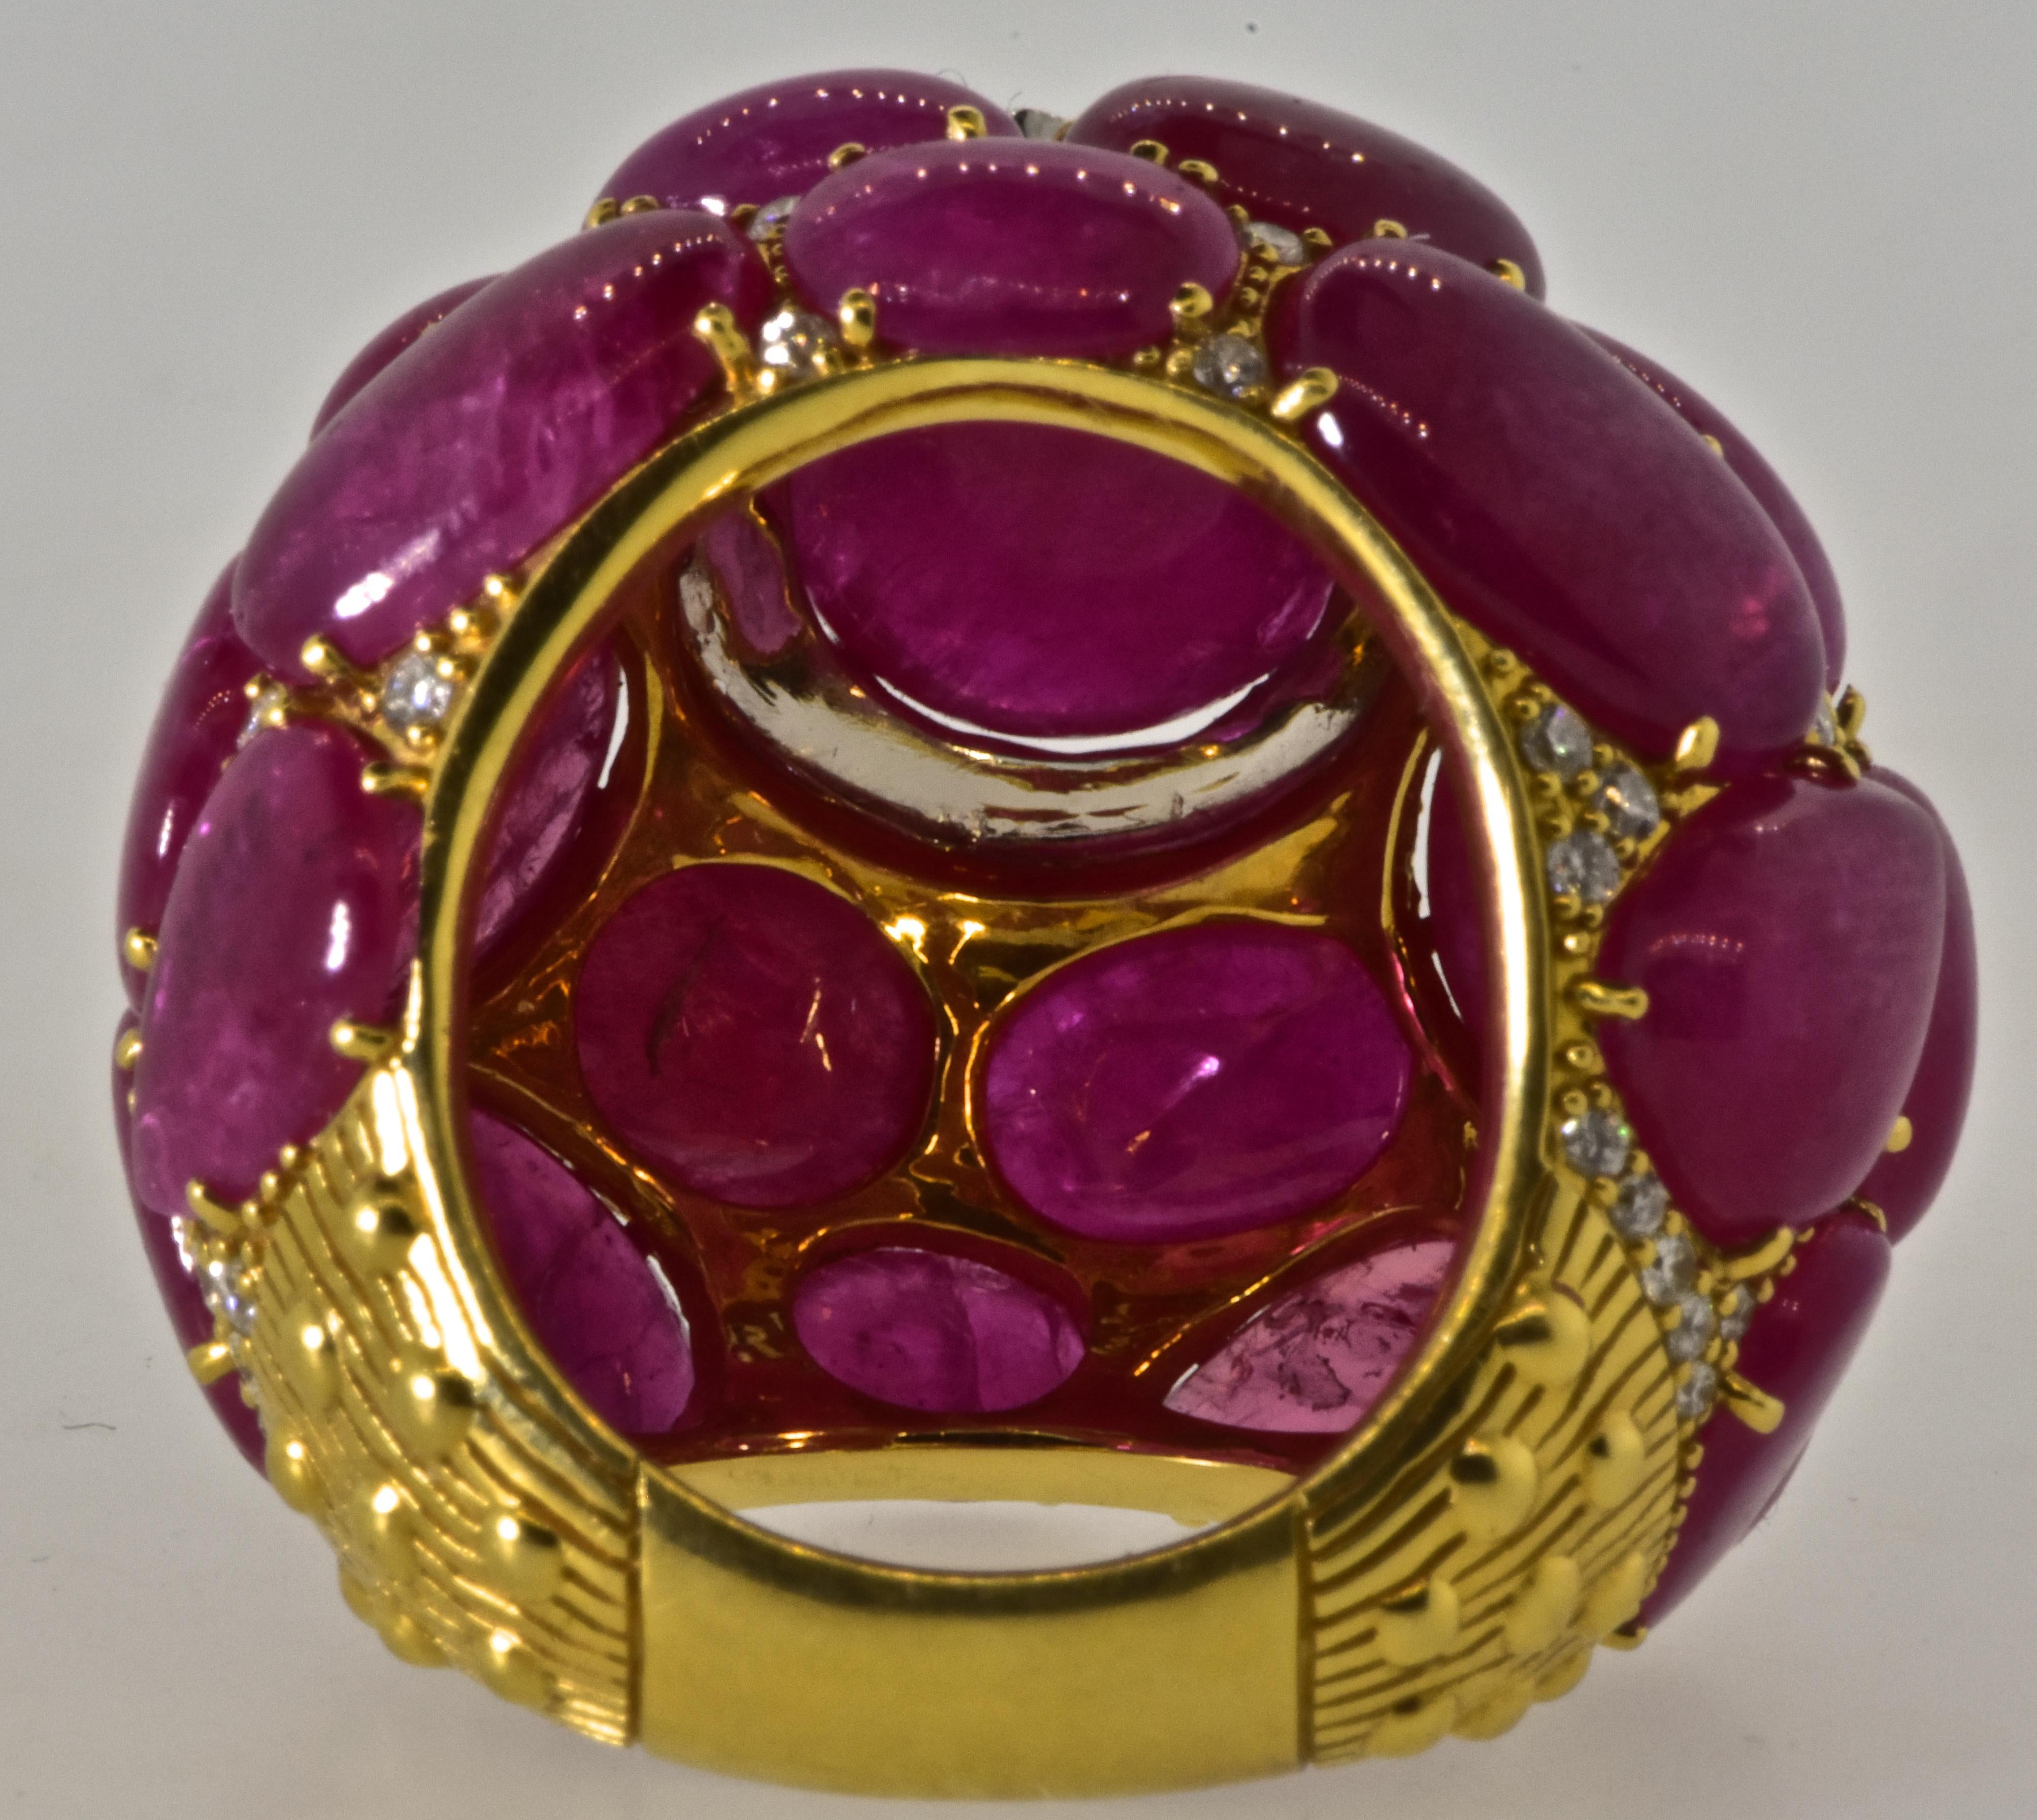 Ruby, diamond and 18K yellow gold large dome ring with wonderful presence.  The natural bright red rubies weigh exactly 45.62 cts.  These natural stones are well matched and - bright and vivid red.  The center ruby weighs 8.11 cts.  The round